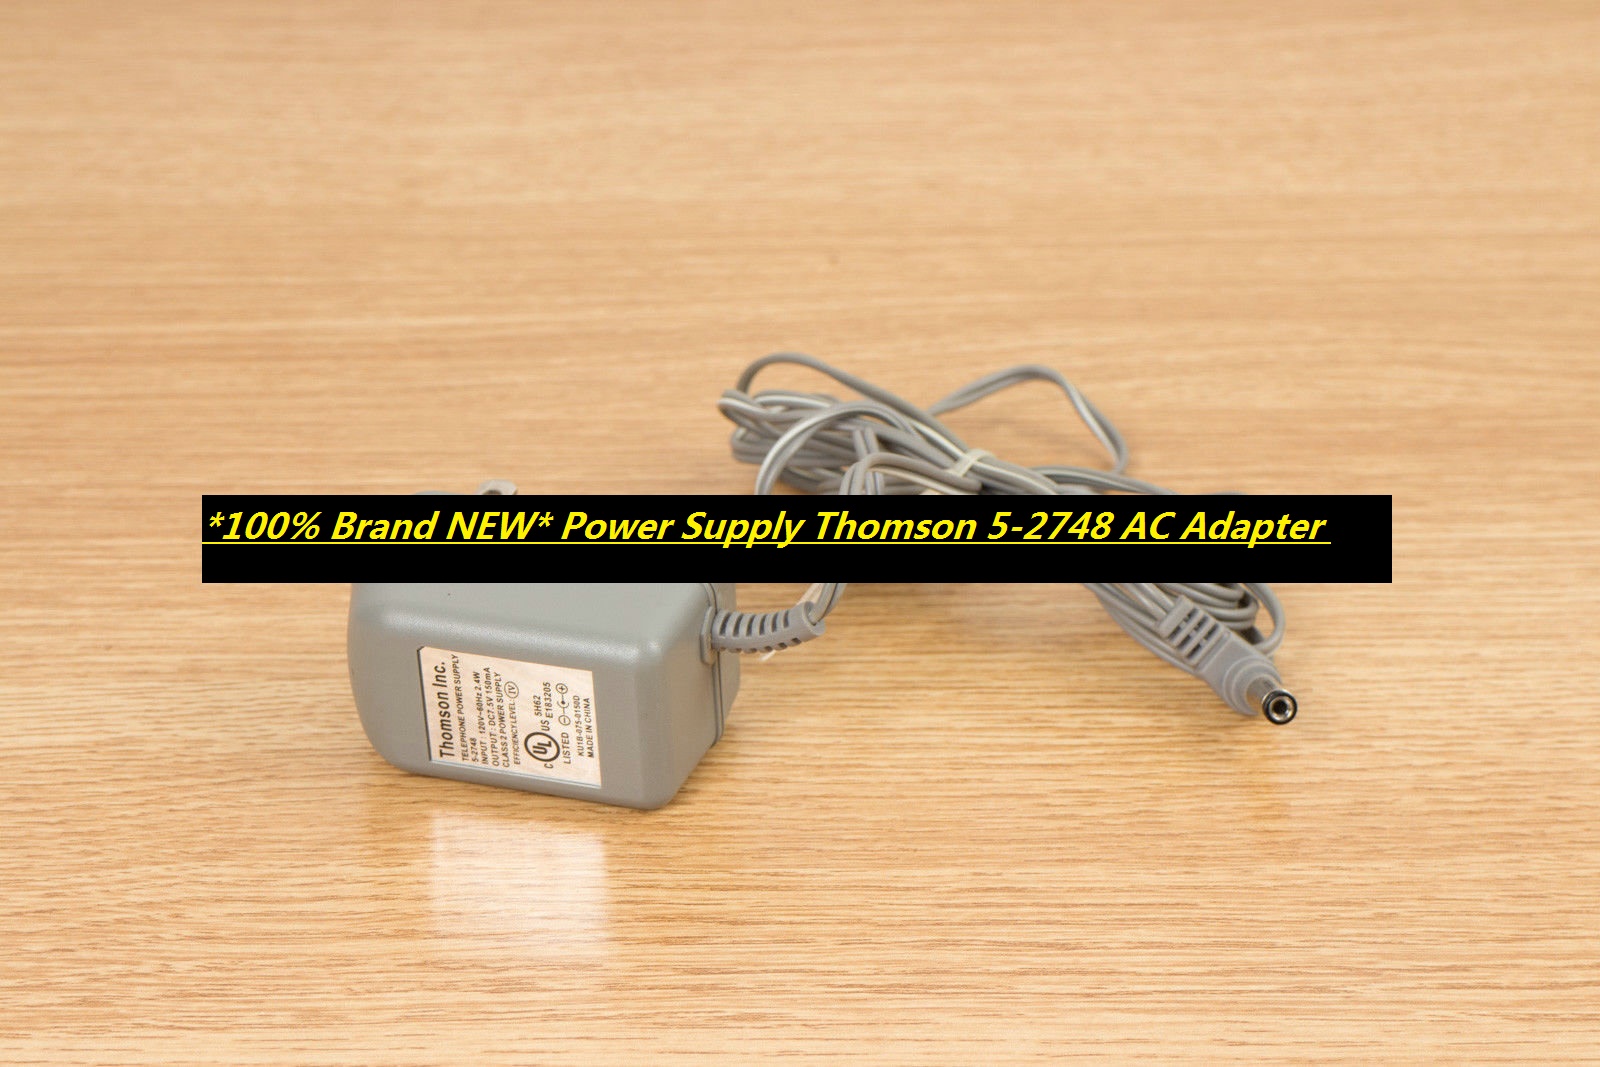 *100% Brand NEW* Power Supply Thomson 5-2748 AC Adapter - Click Image to Close